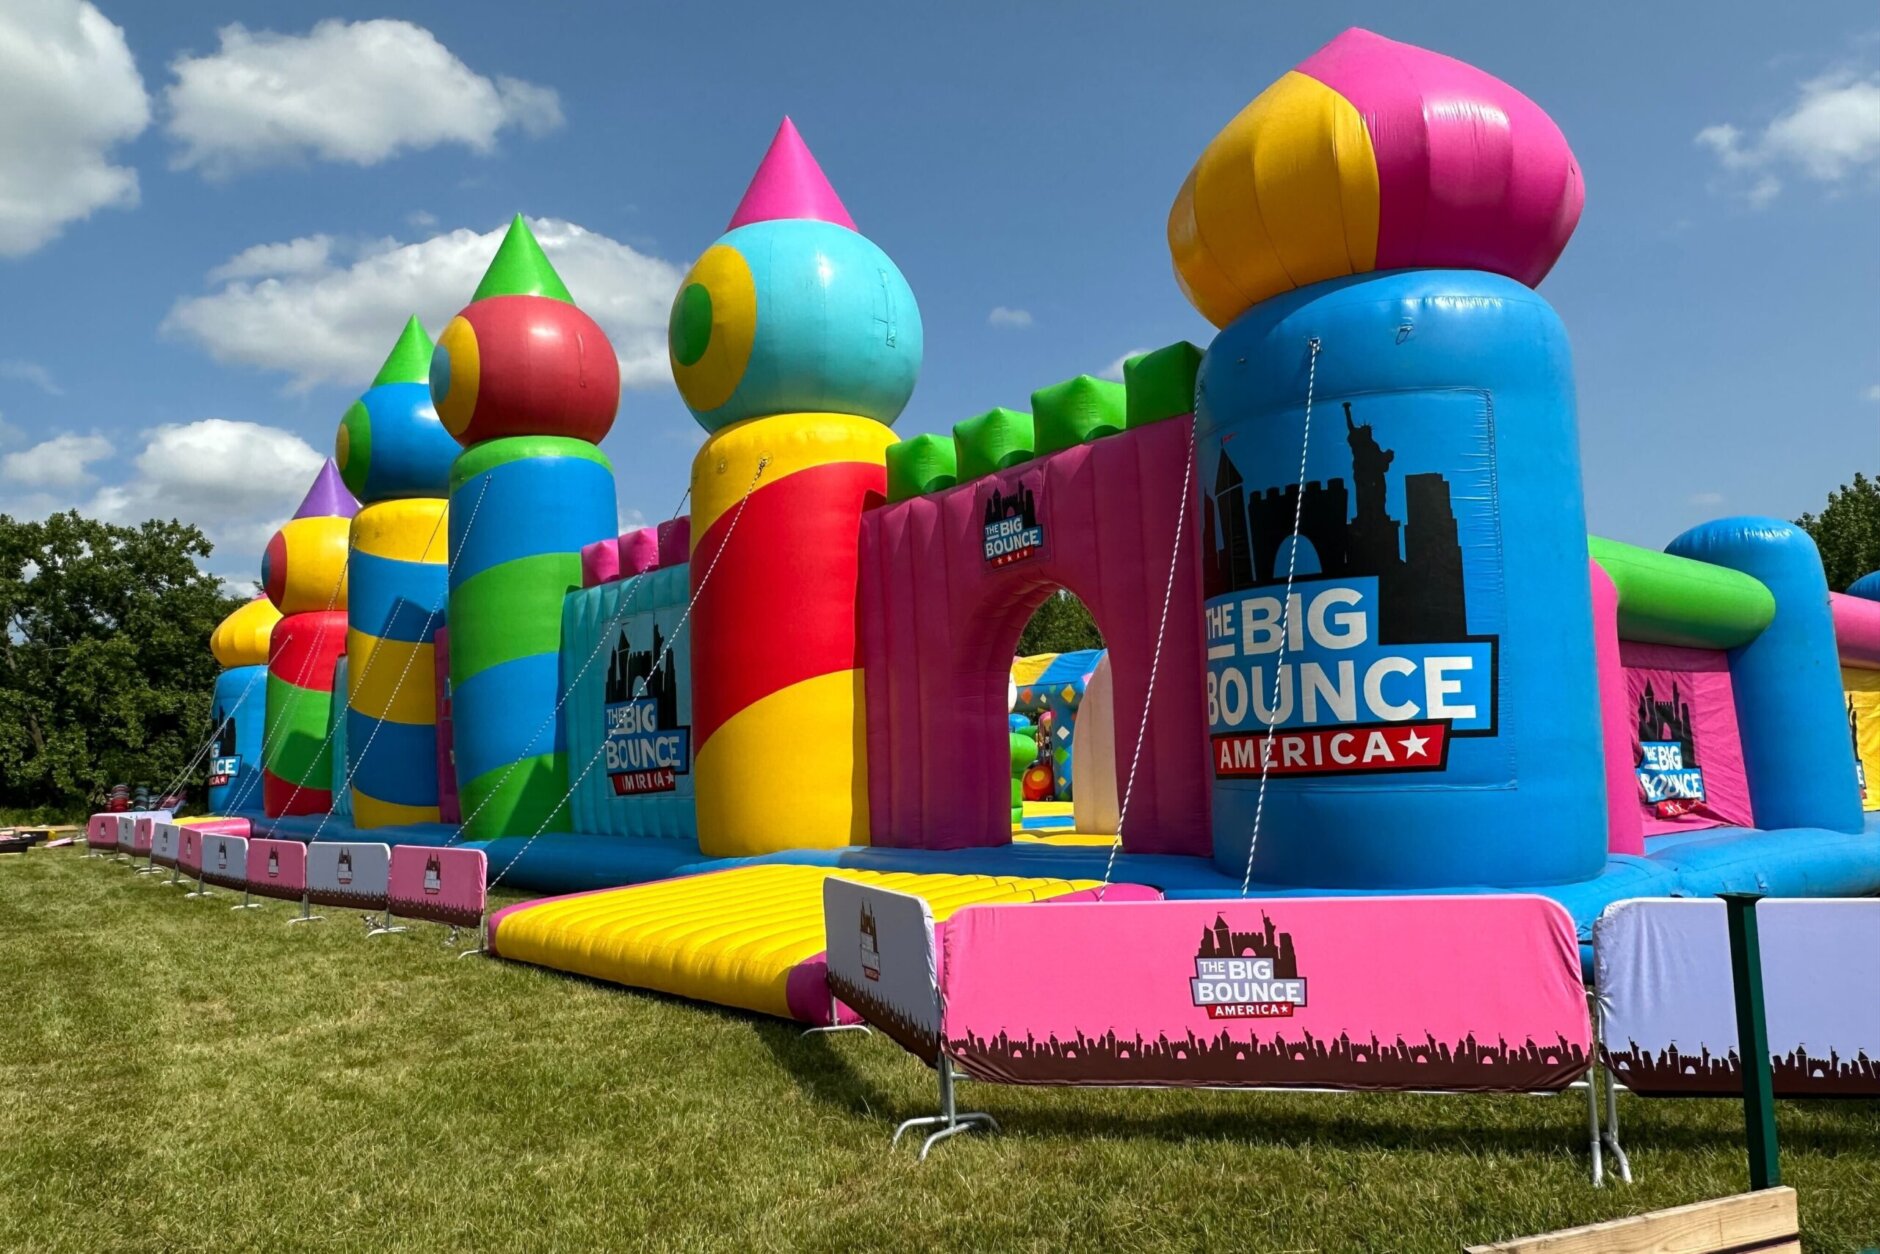 <p>The Big Bounce America attraction has been in town since May 20. However, June 10 and 11 are the last two days to get visit the attraction before it leaves the area (<a href="https://wtop.com/dc/2023/06/dc-air-quality-minimally-improving-code-orange-expected-friday/" target="_blank" rel="noopener">air quality permitting</a>).</p>
<p>&#8220;The vibes are great. It really feels whimsical — you can bring out your inner child,&#8221; said Elizabeth Clapp, who went last weekend with three of her closest friends.</p>
